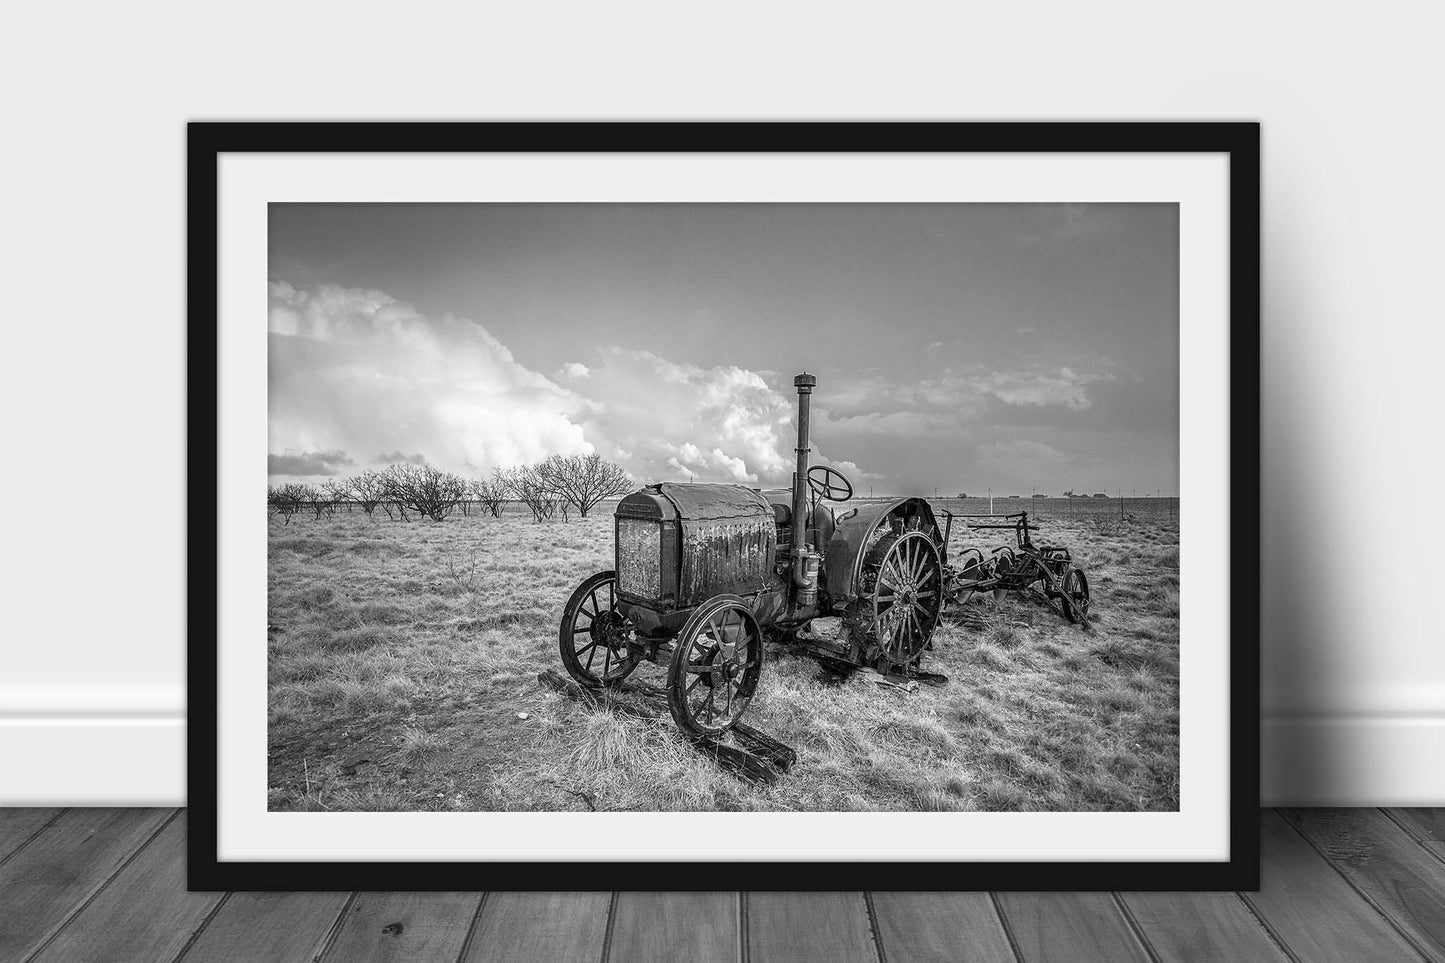 Framed and matted black and white photography print of a rustic McCormick-Deering tractor in a field on a stormy day in Texas by Sean Ramsey of Southern Plains Photography.